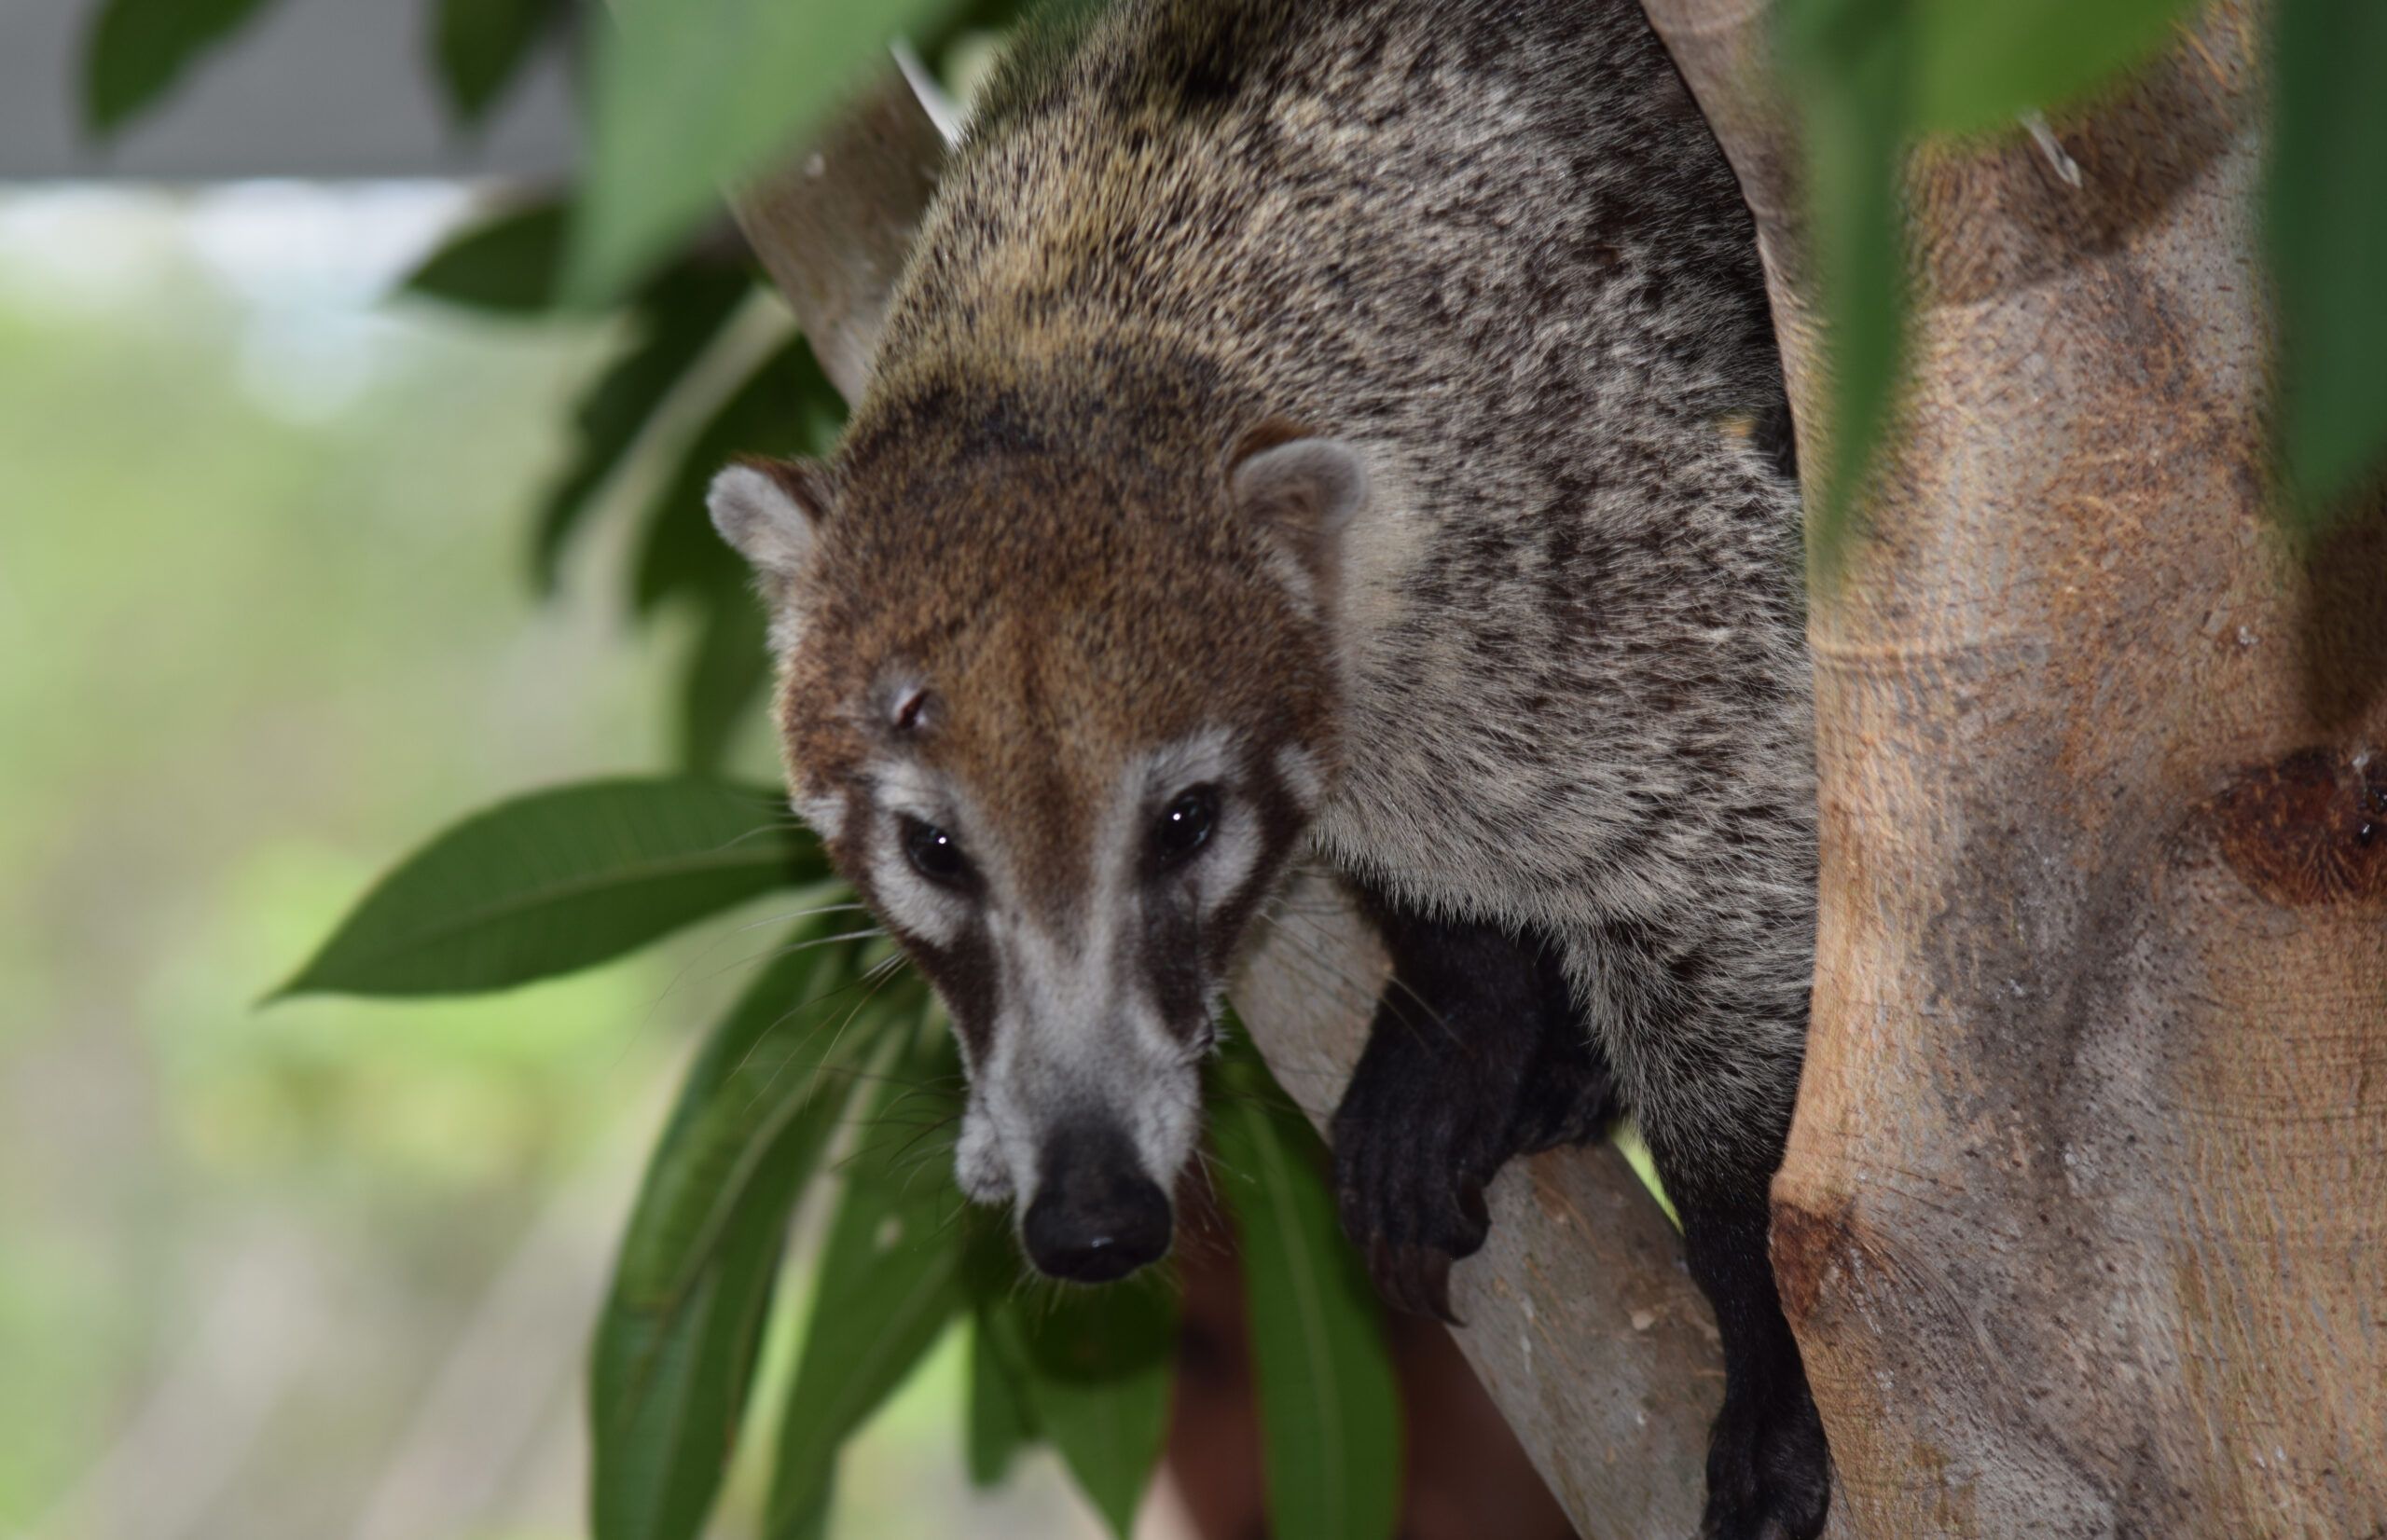 Coati sitting in a tree on the Papagayo Peninsula at the Andaz Resort in Guanacaste, Costa Rica